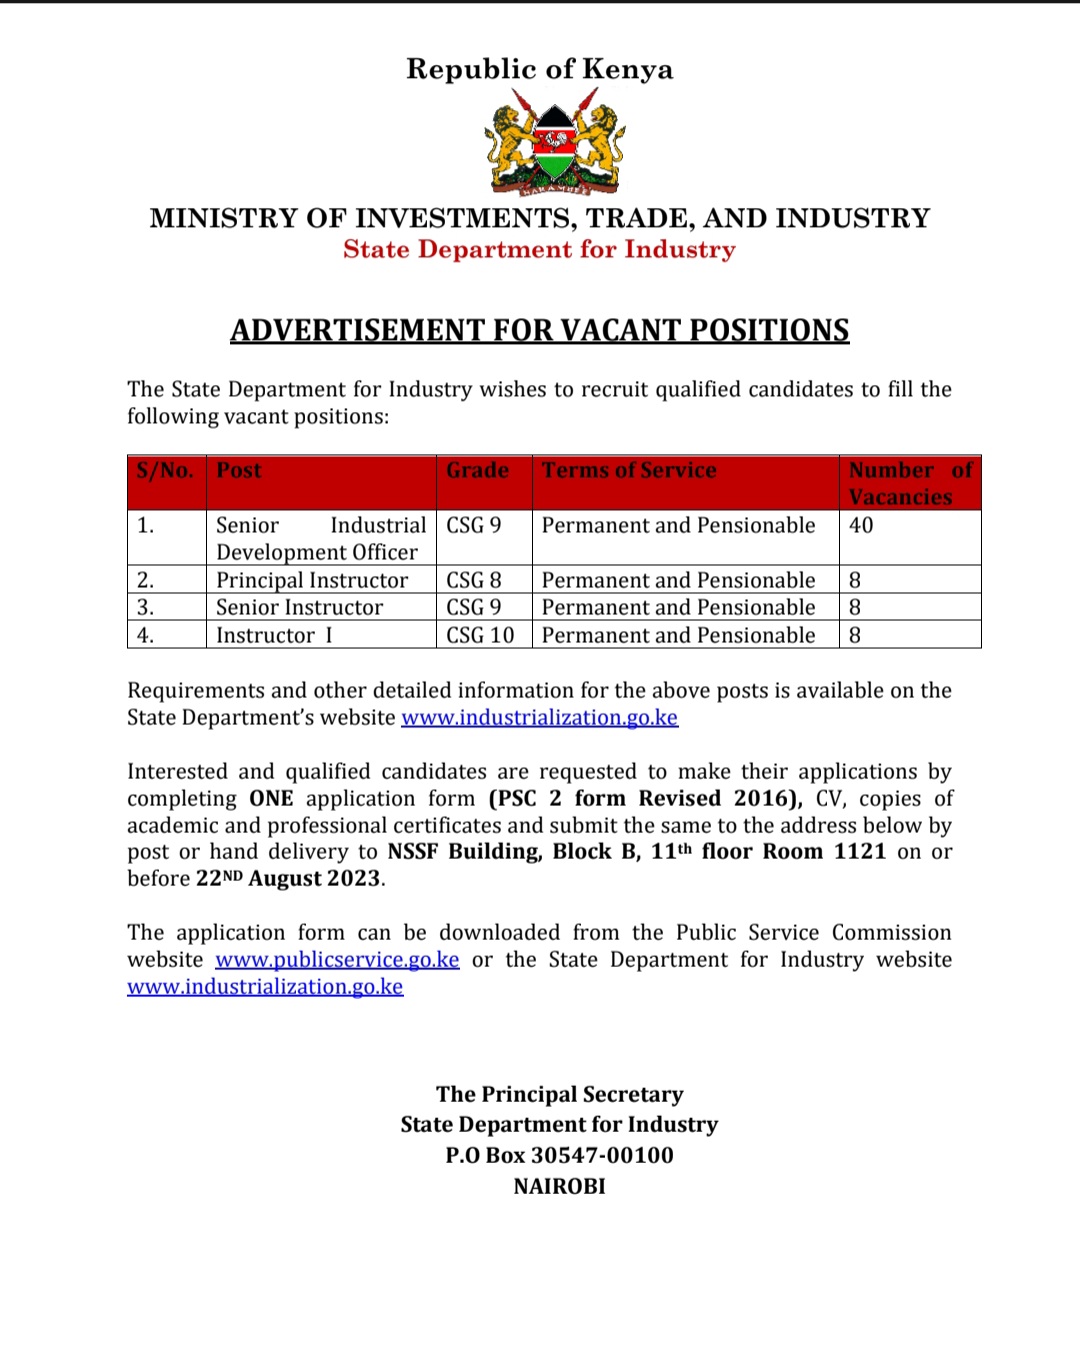 ADVERTISEMENT FOR VACANT POSITIONS 2023